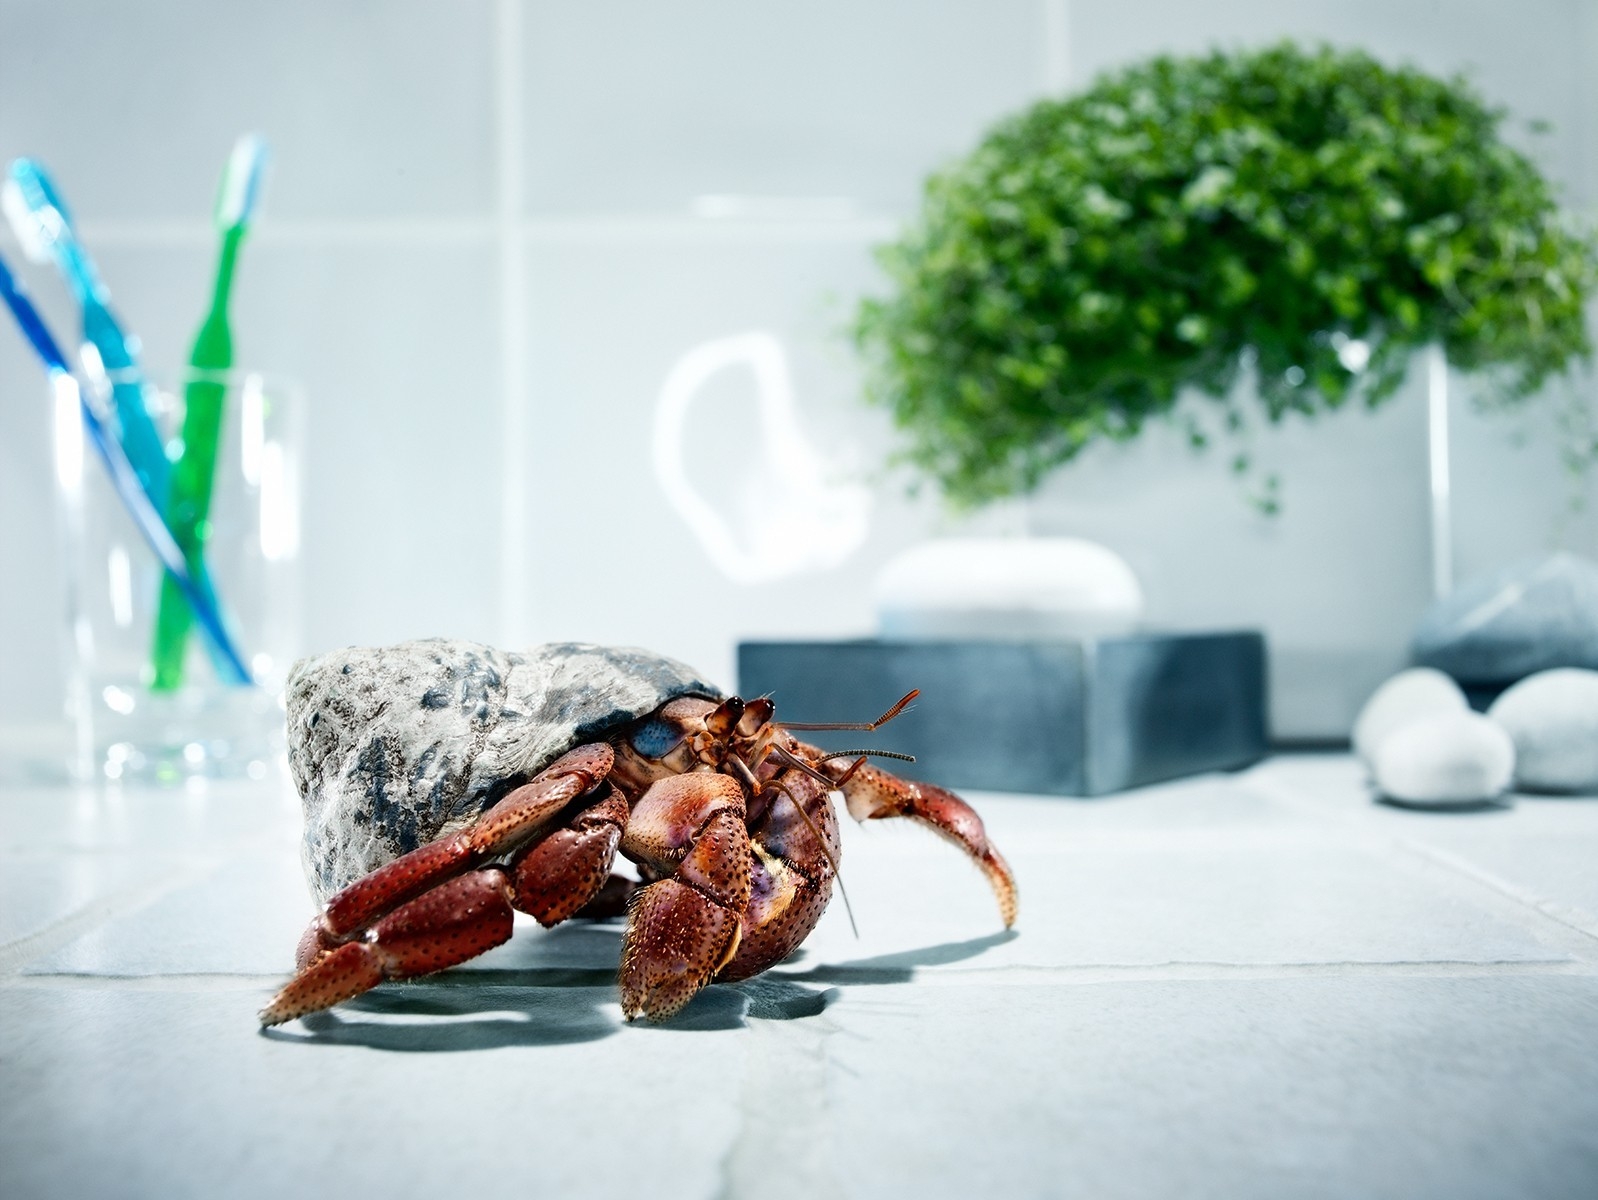 animals, glass, nice, paws, carapace, shell, climb, crab, nicely, toothbrushes